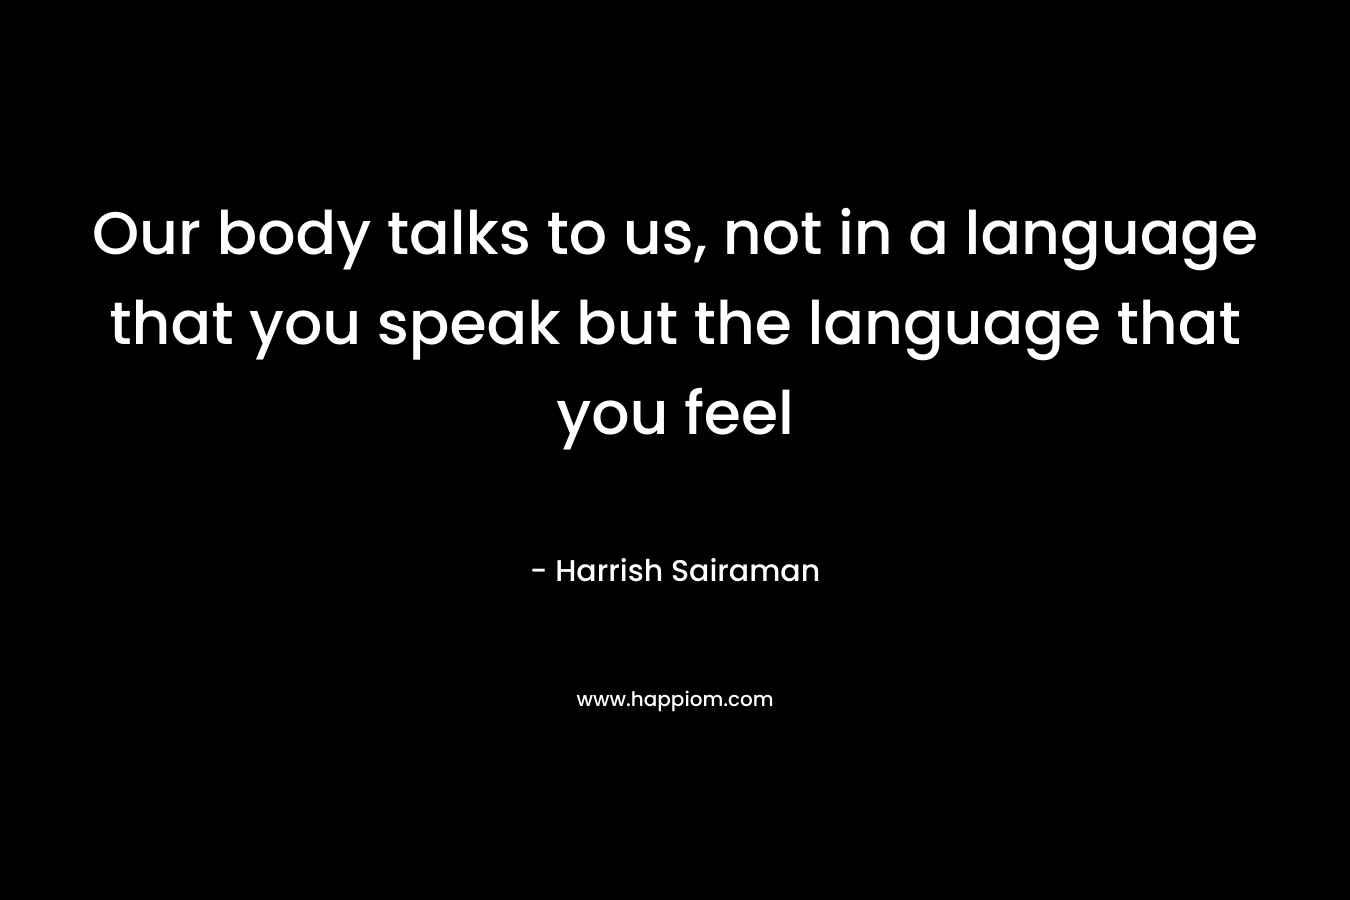 Our body talks to us, not in a language that you speak but the language that you feel – Harrish Sairaman